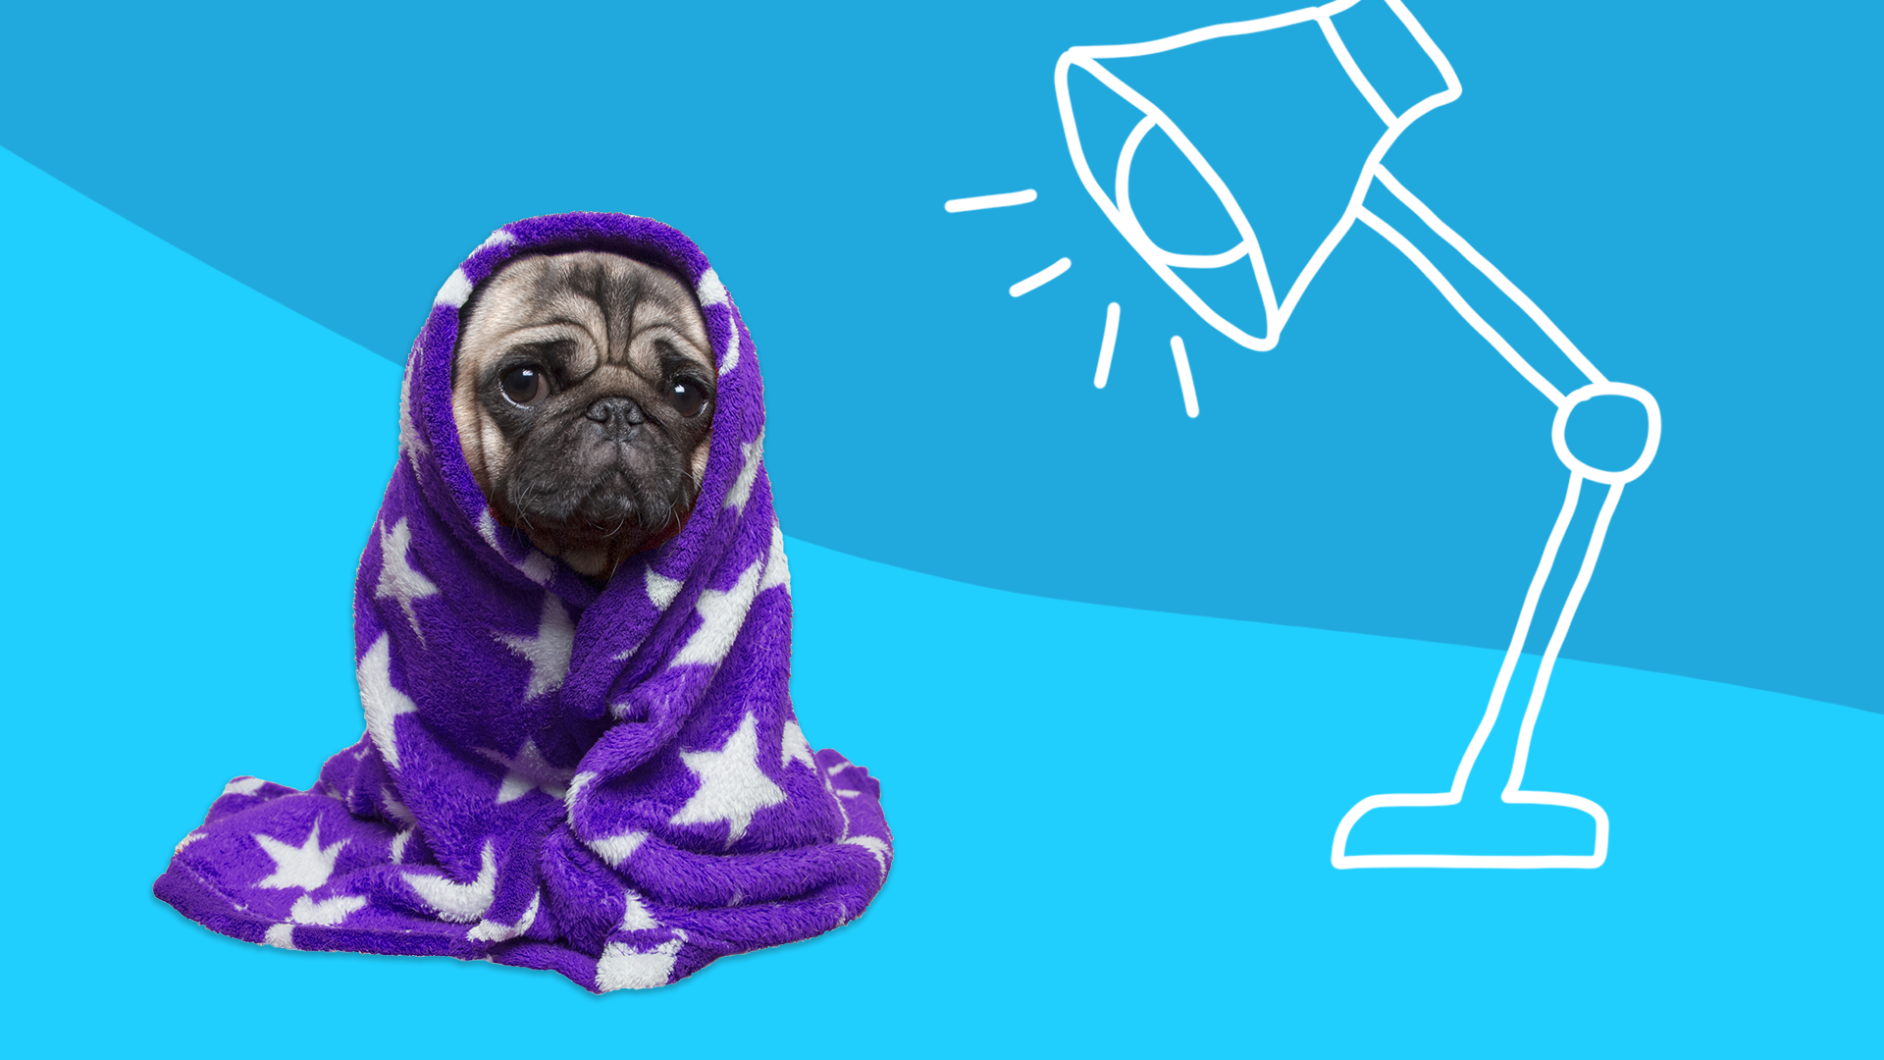 A pug wrapped in a blanket represents seasonal affective disorder